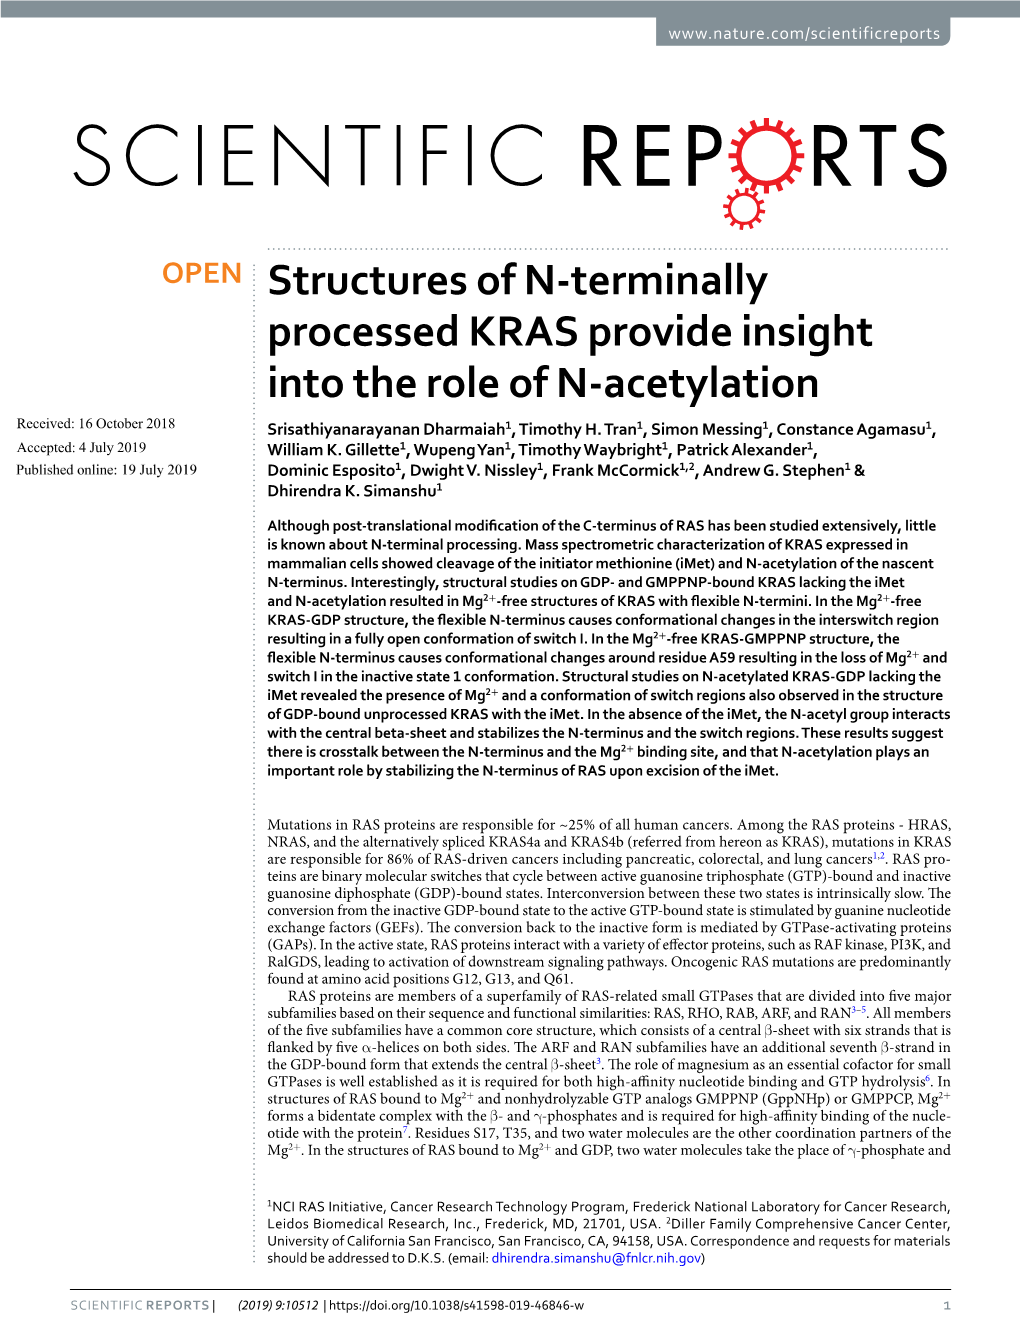 Structures of N-Terminally Processed KRAS Provide Insight Into the Role of N-Acetylation Received: 16 October 2018 Srisathiyanarayanan Dharmaiah1, Timothy H